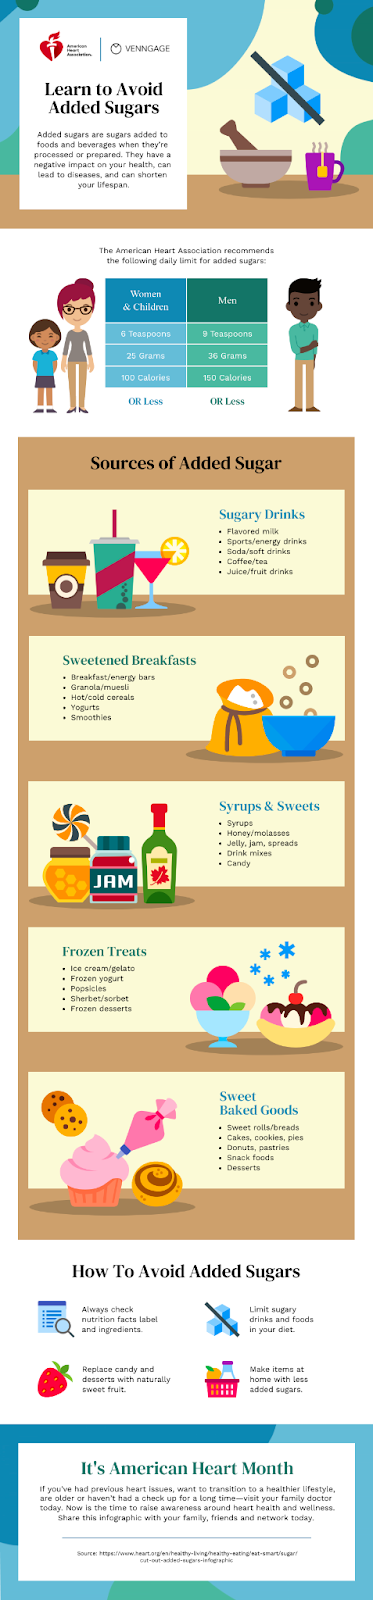 Added Sugars Infographic
